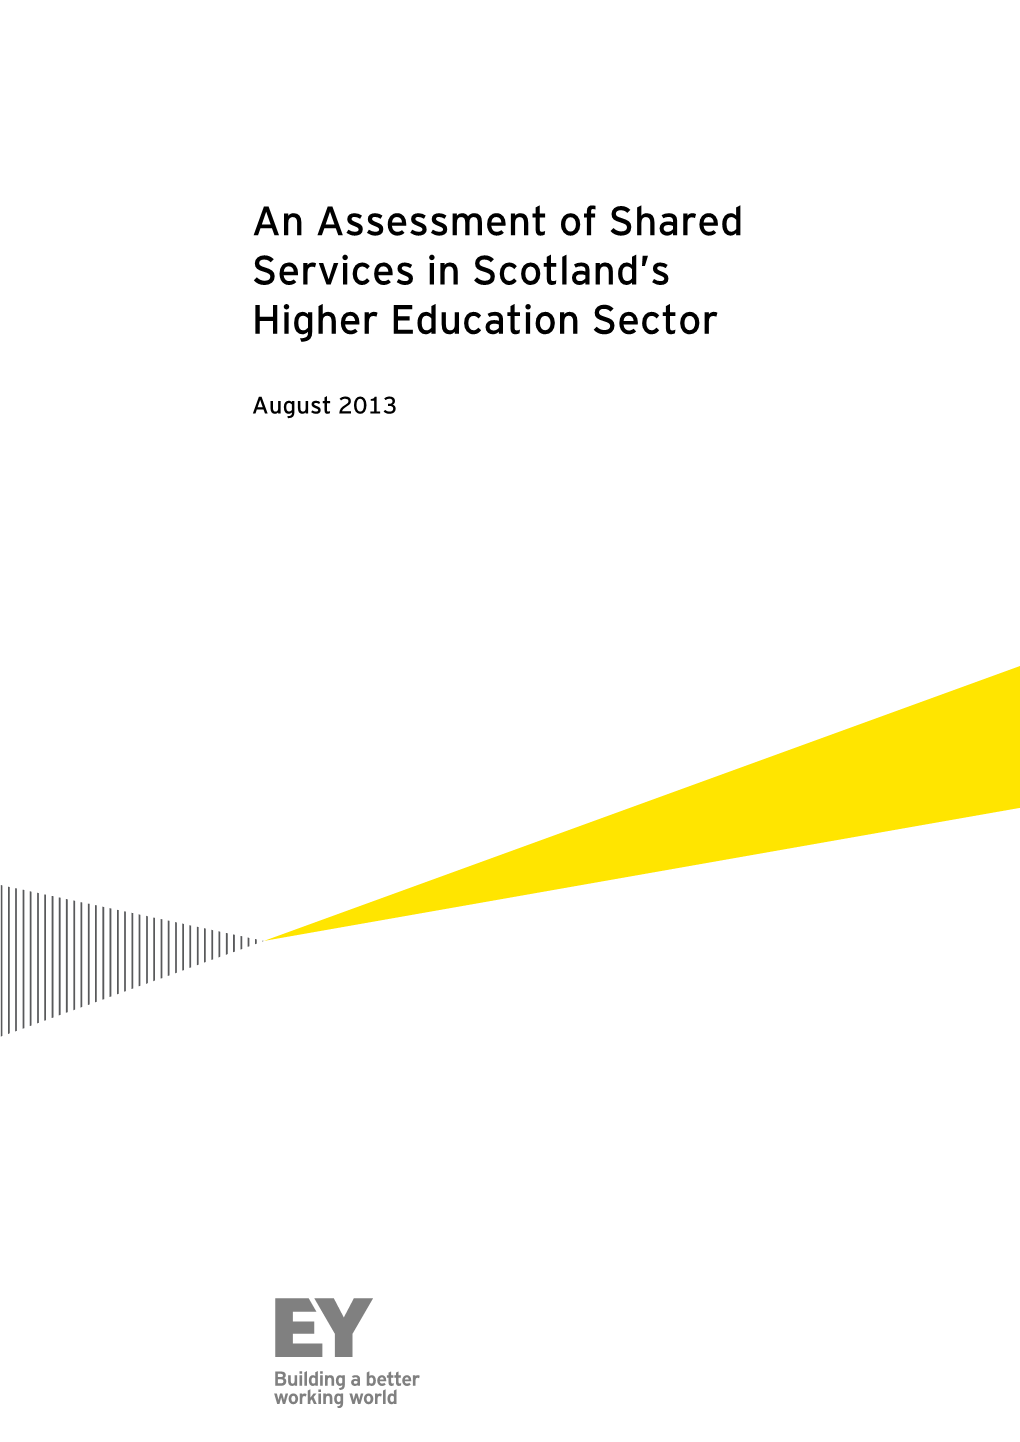 Shared Services in the Higher Education Sector in Scotland